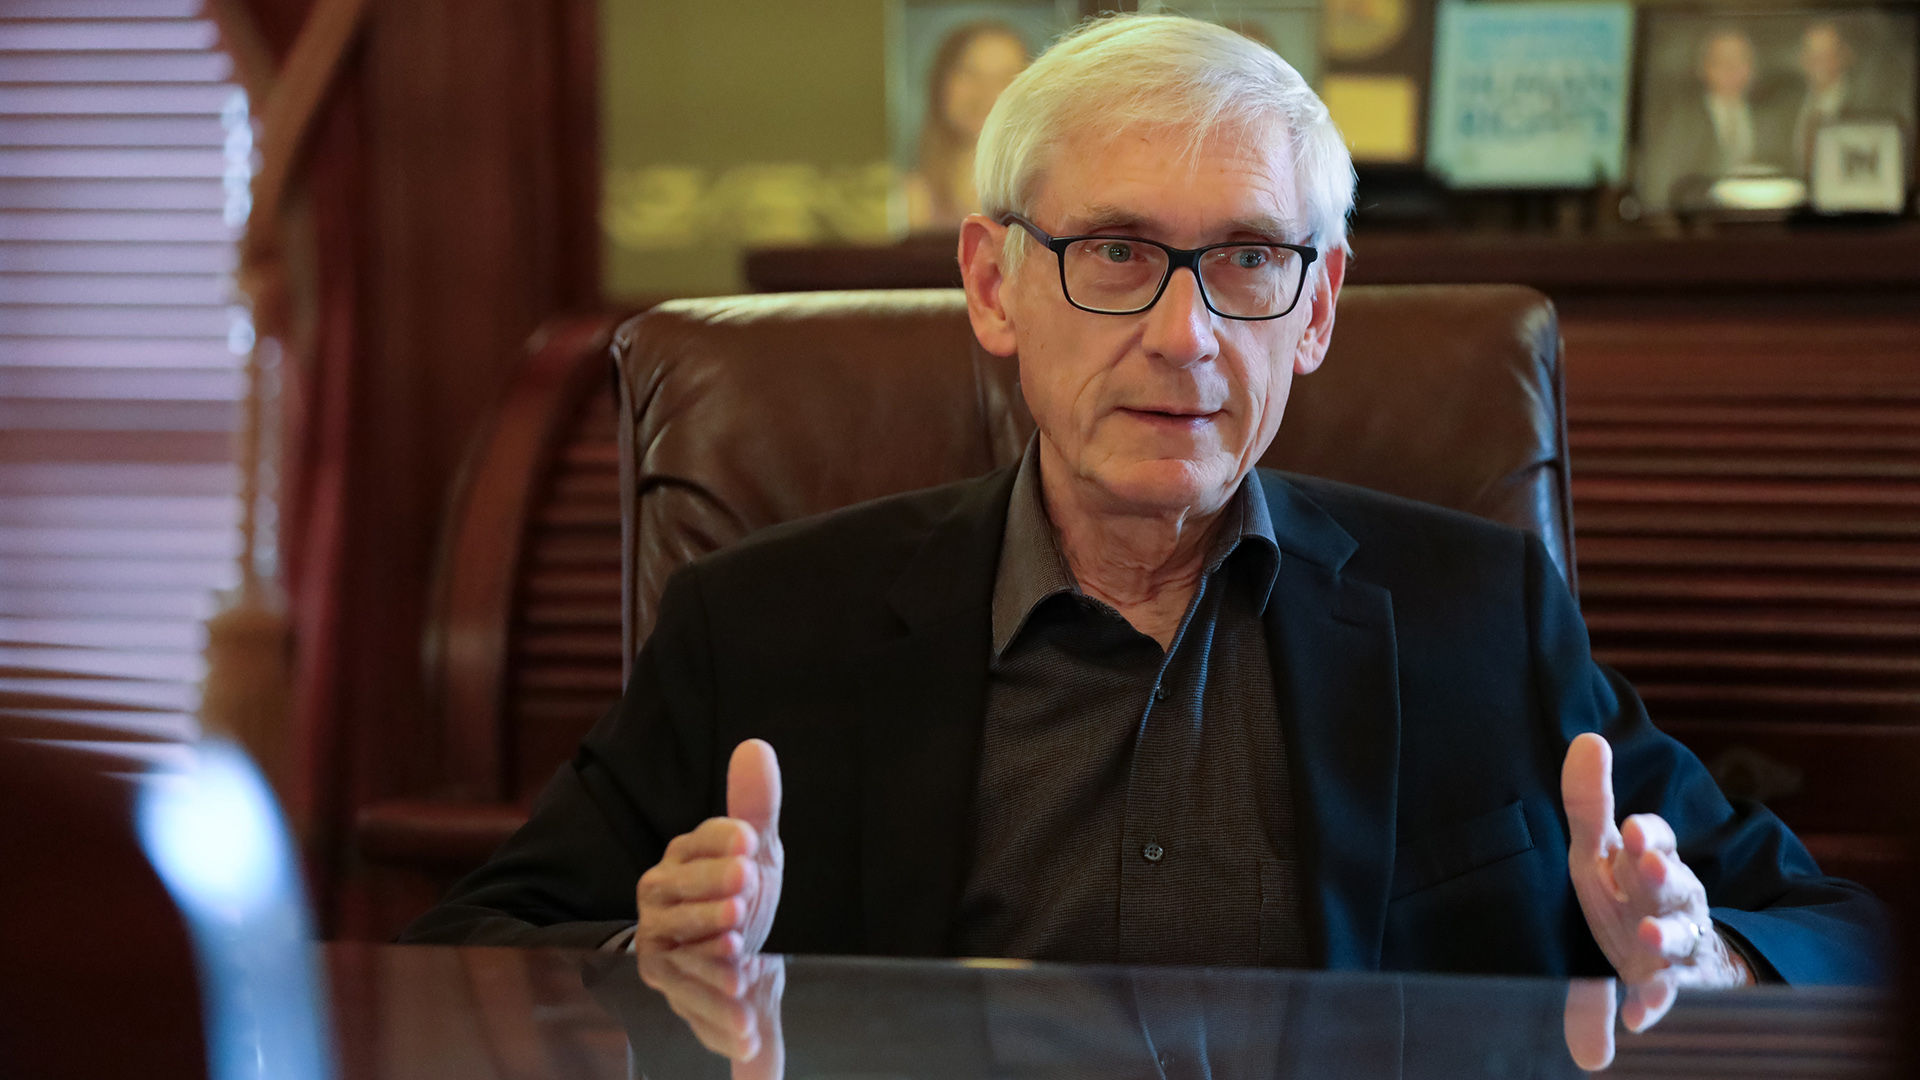 Tony Evers sits in a high-backed leather chair and gestures with both hands on a glass-topped table, with a roll top desk with photos and other items on it in the background.